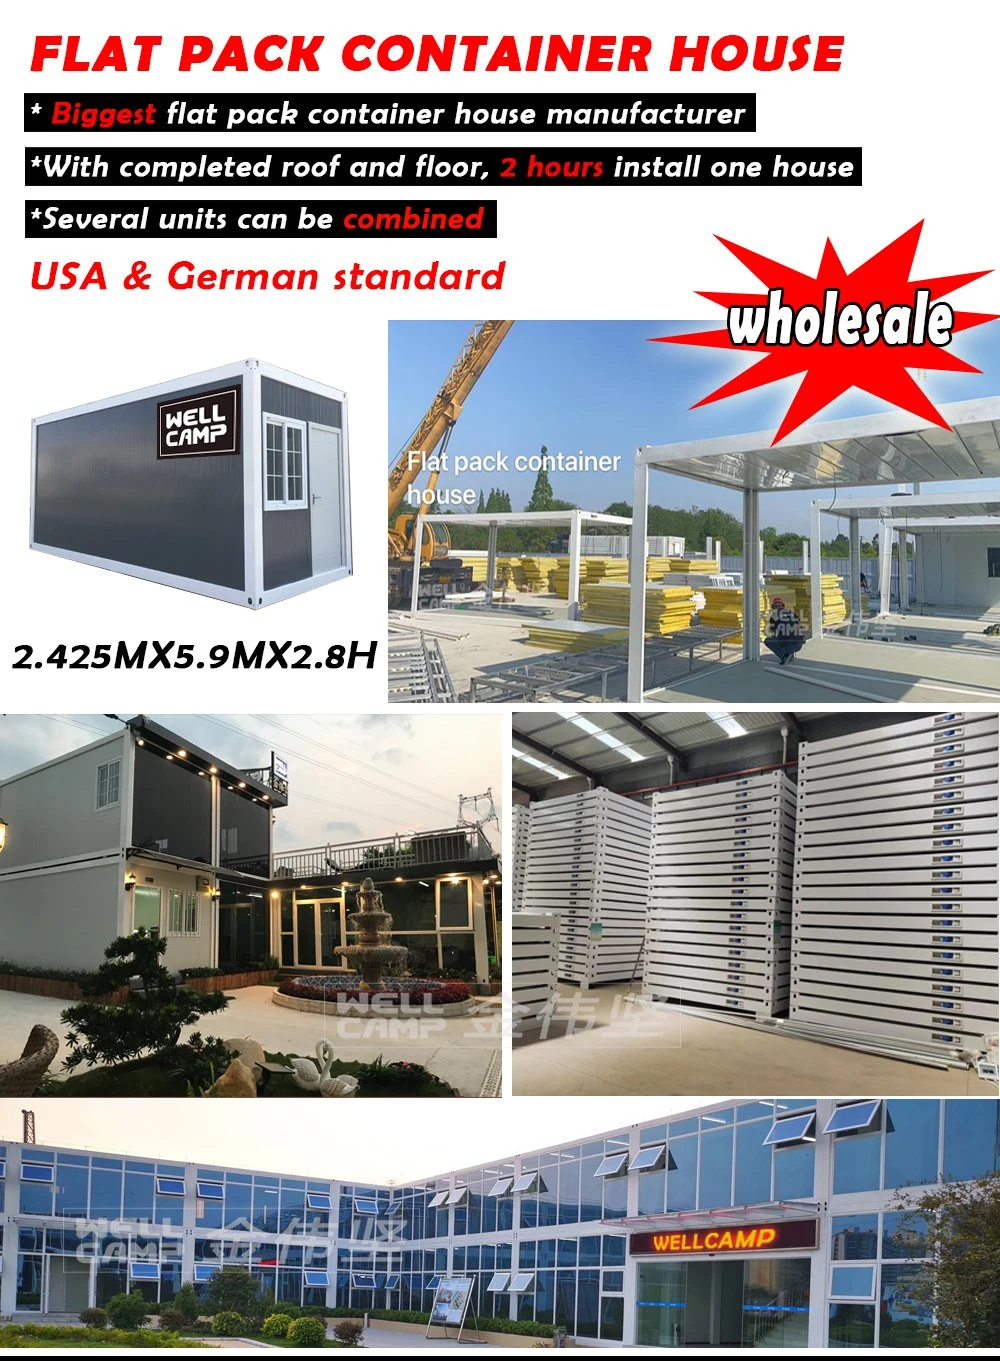 Mobile Light Steel Frame Structure Prefab Container House in Steel Structure Prefabricated Building